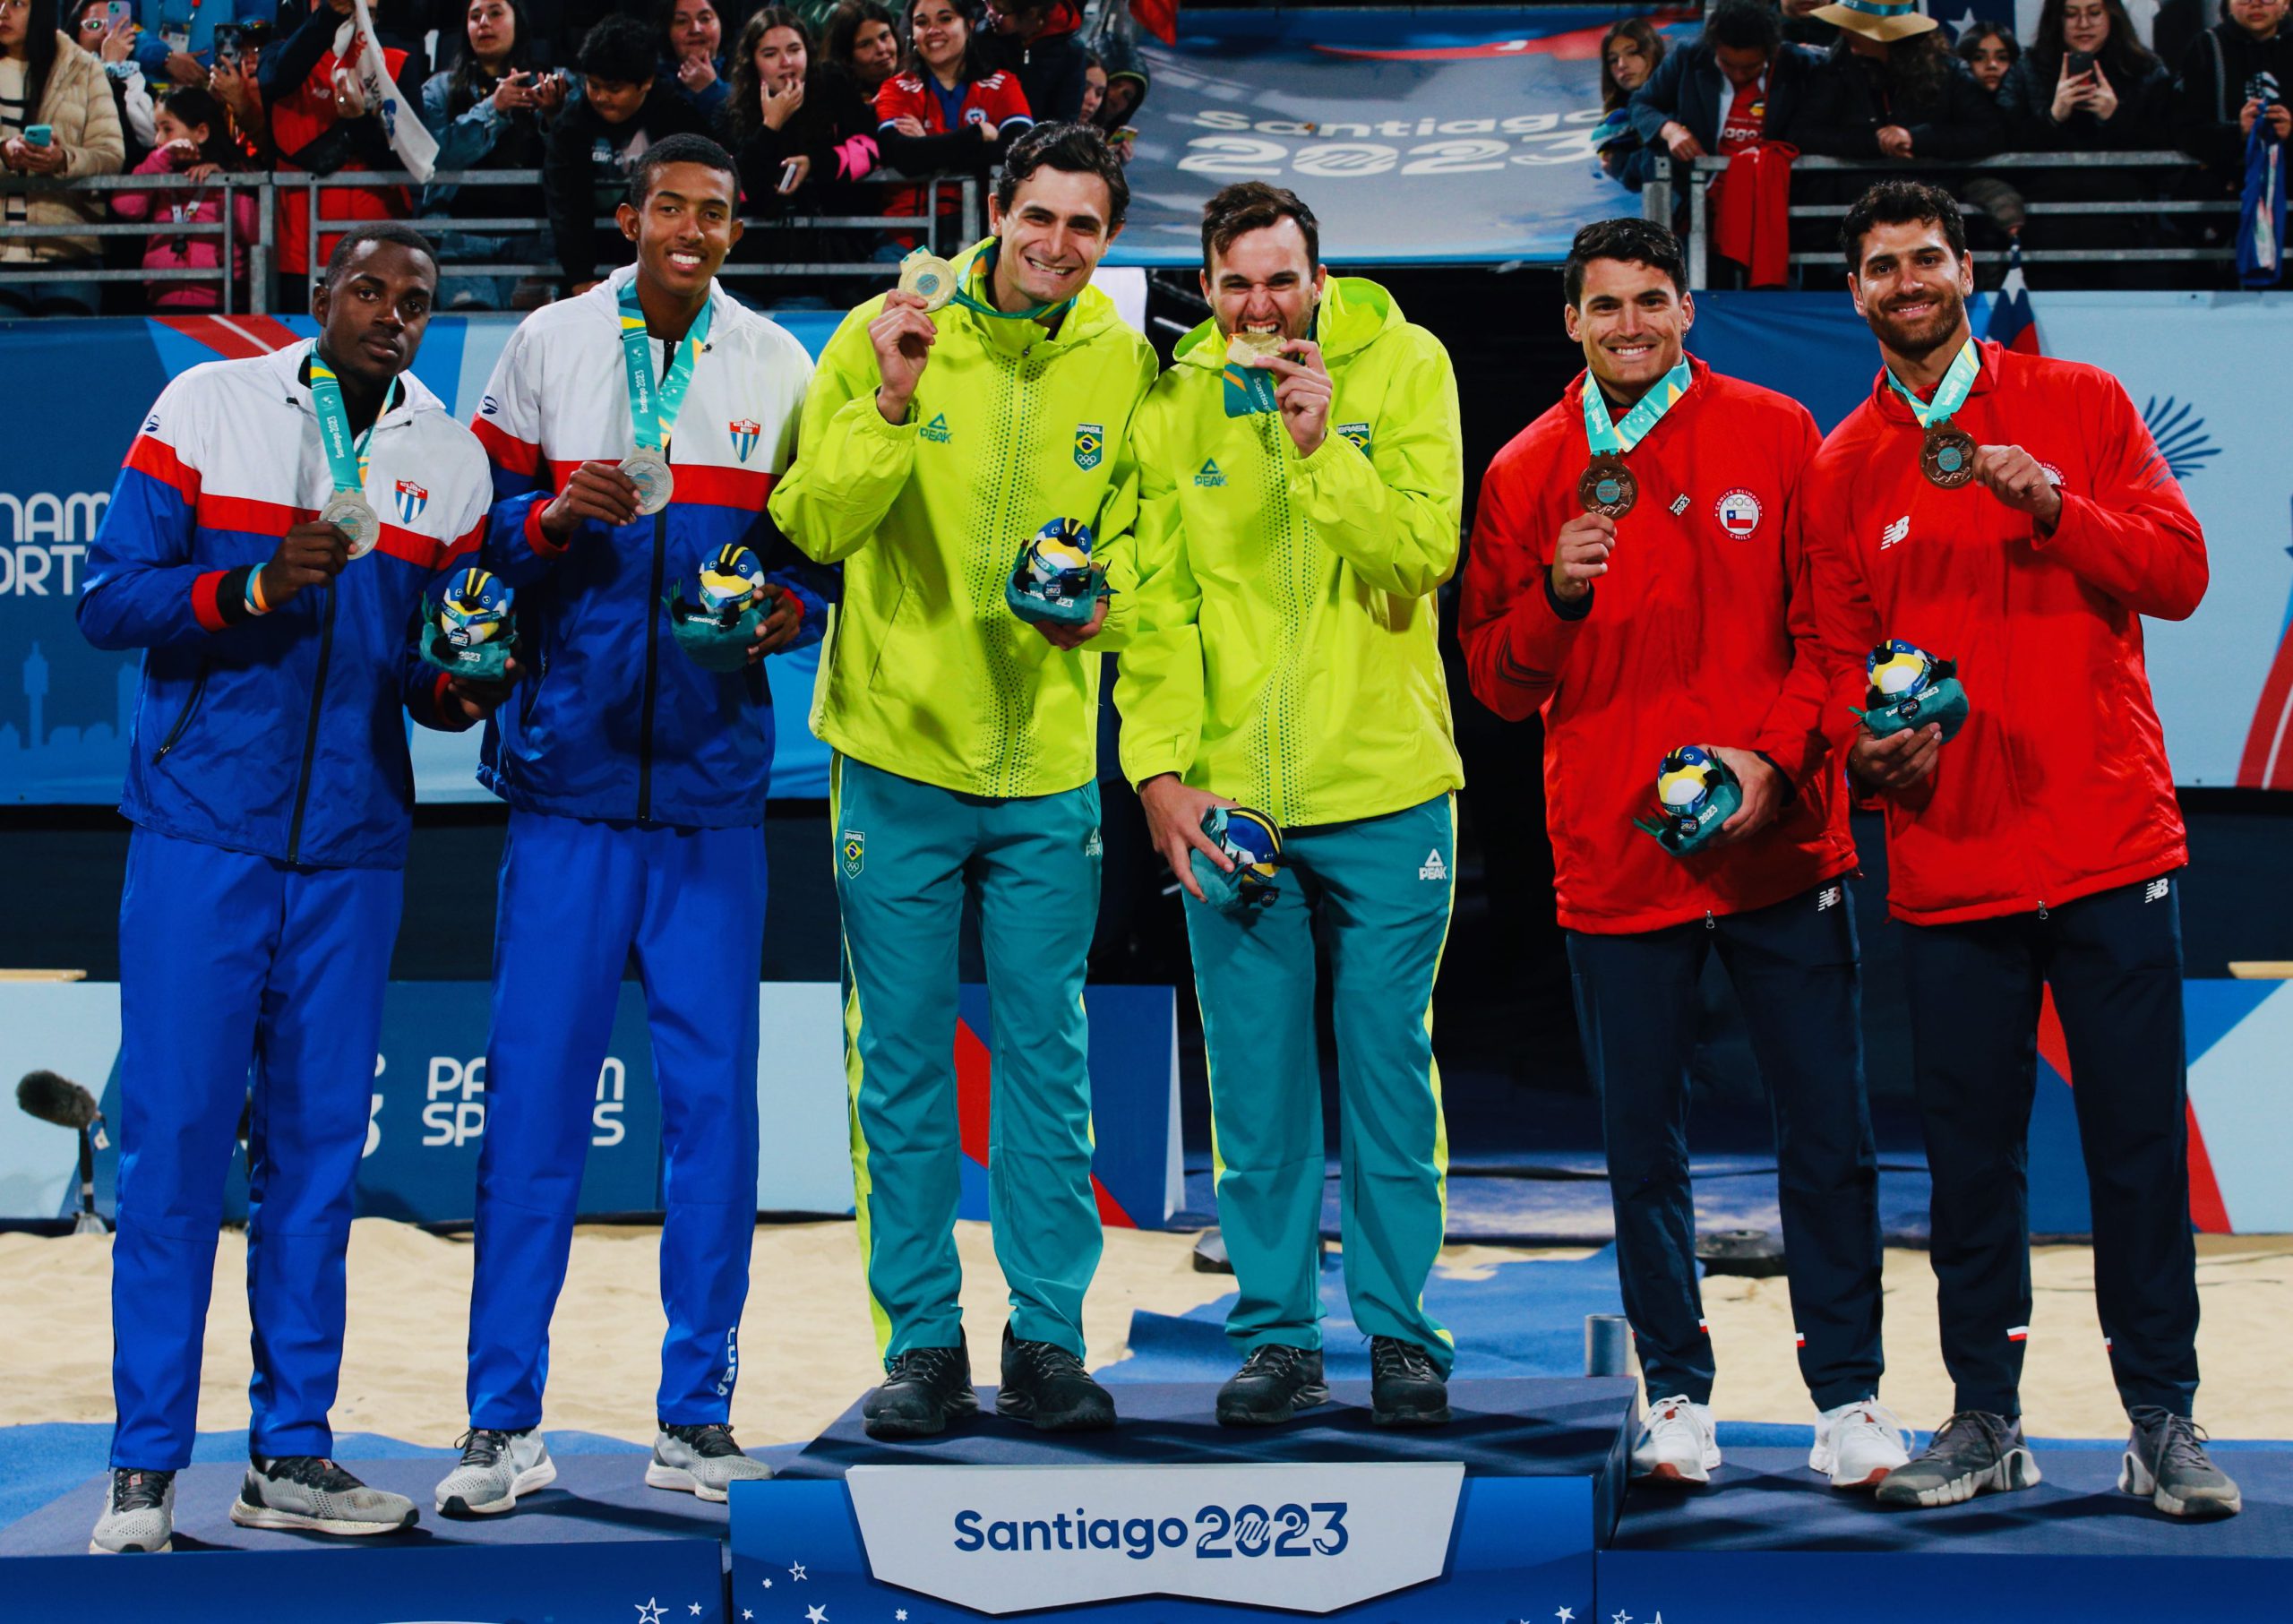 George and André secure Gold for Brazil in Men’s Beach Volleyball at Santiago 2023